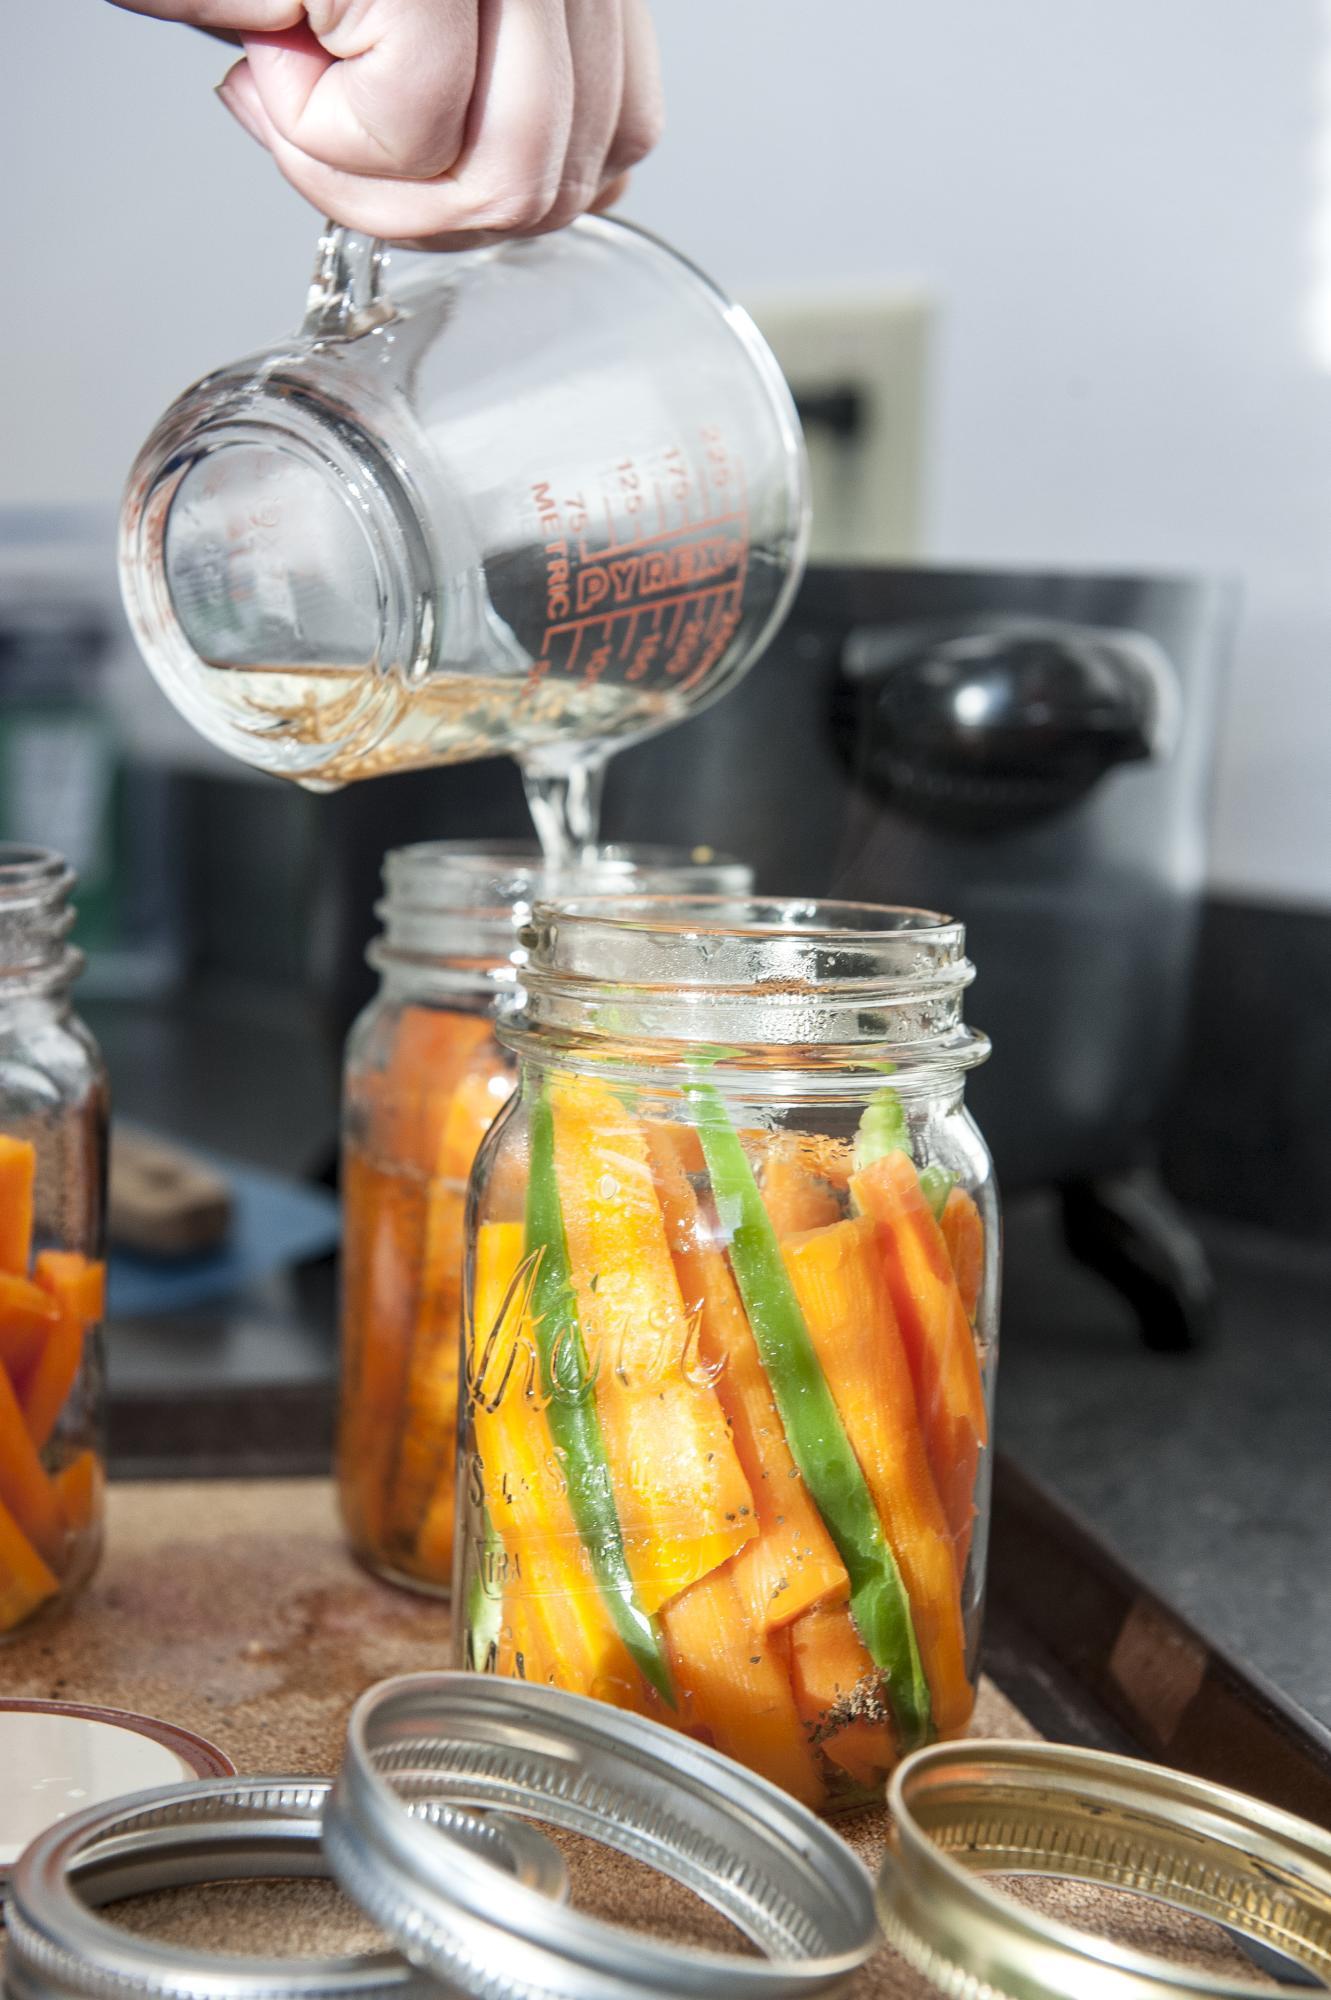 Liquid is poured from a measuring cup into a jar full of sliced carrots during a food preservation class.